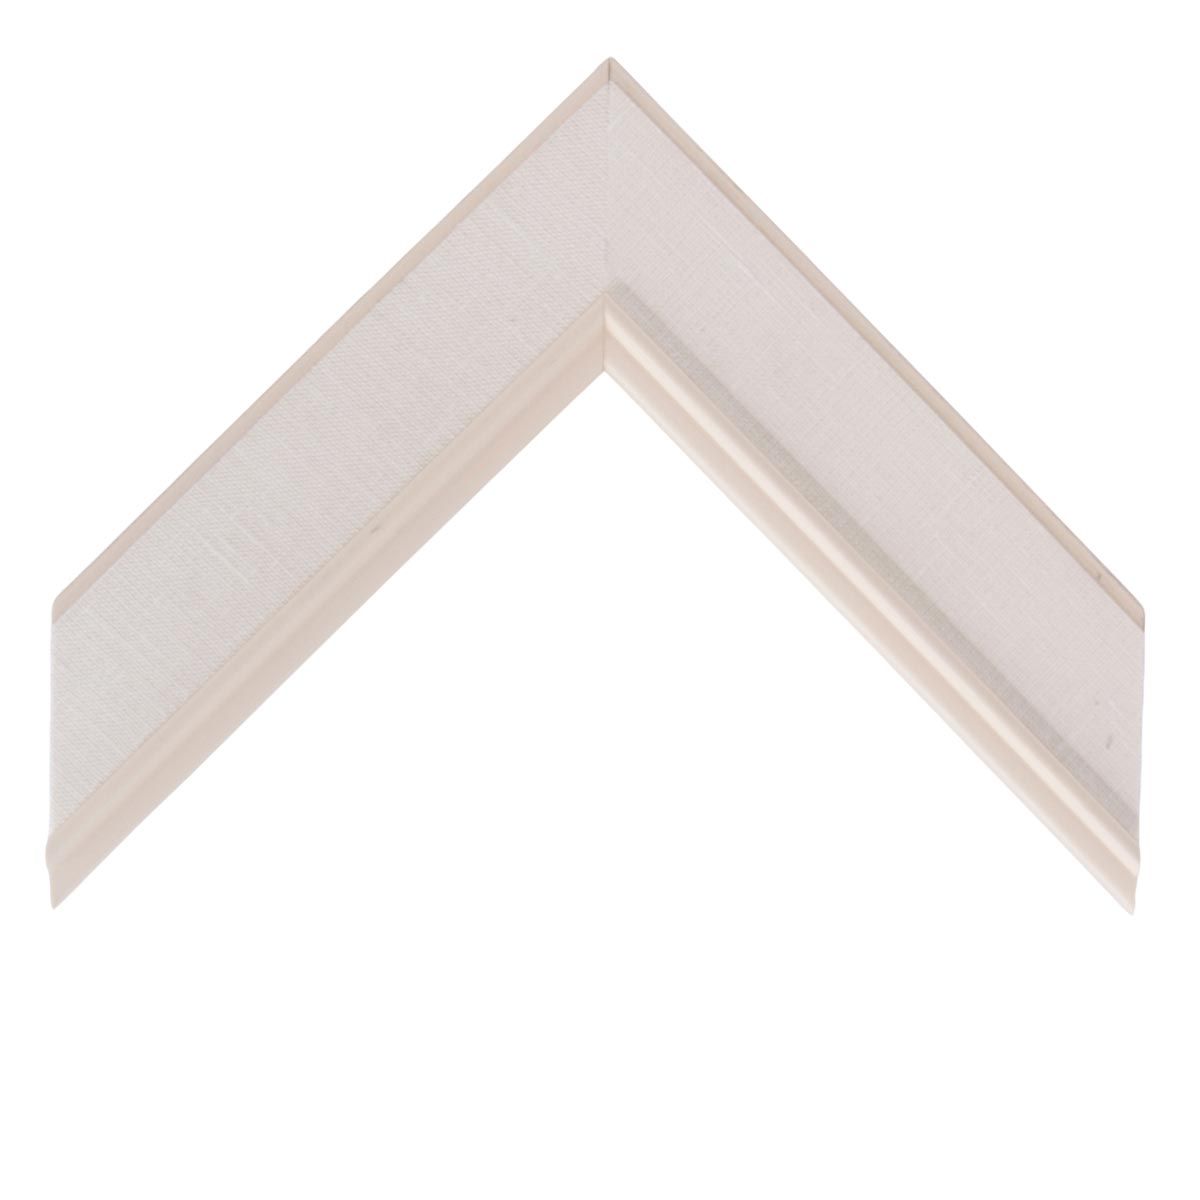 Linen Liner Moulding - Natural, White Bead ML120-1 ¾, 16 x 20 inches